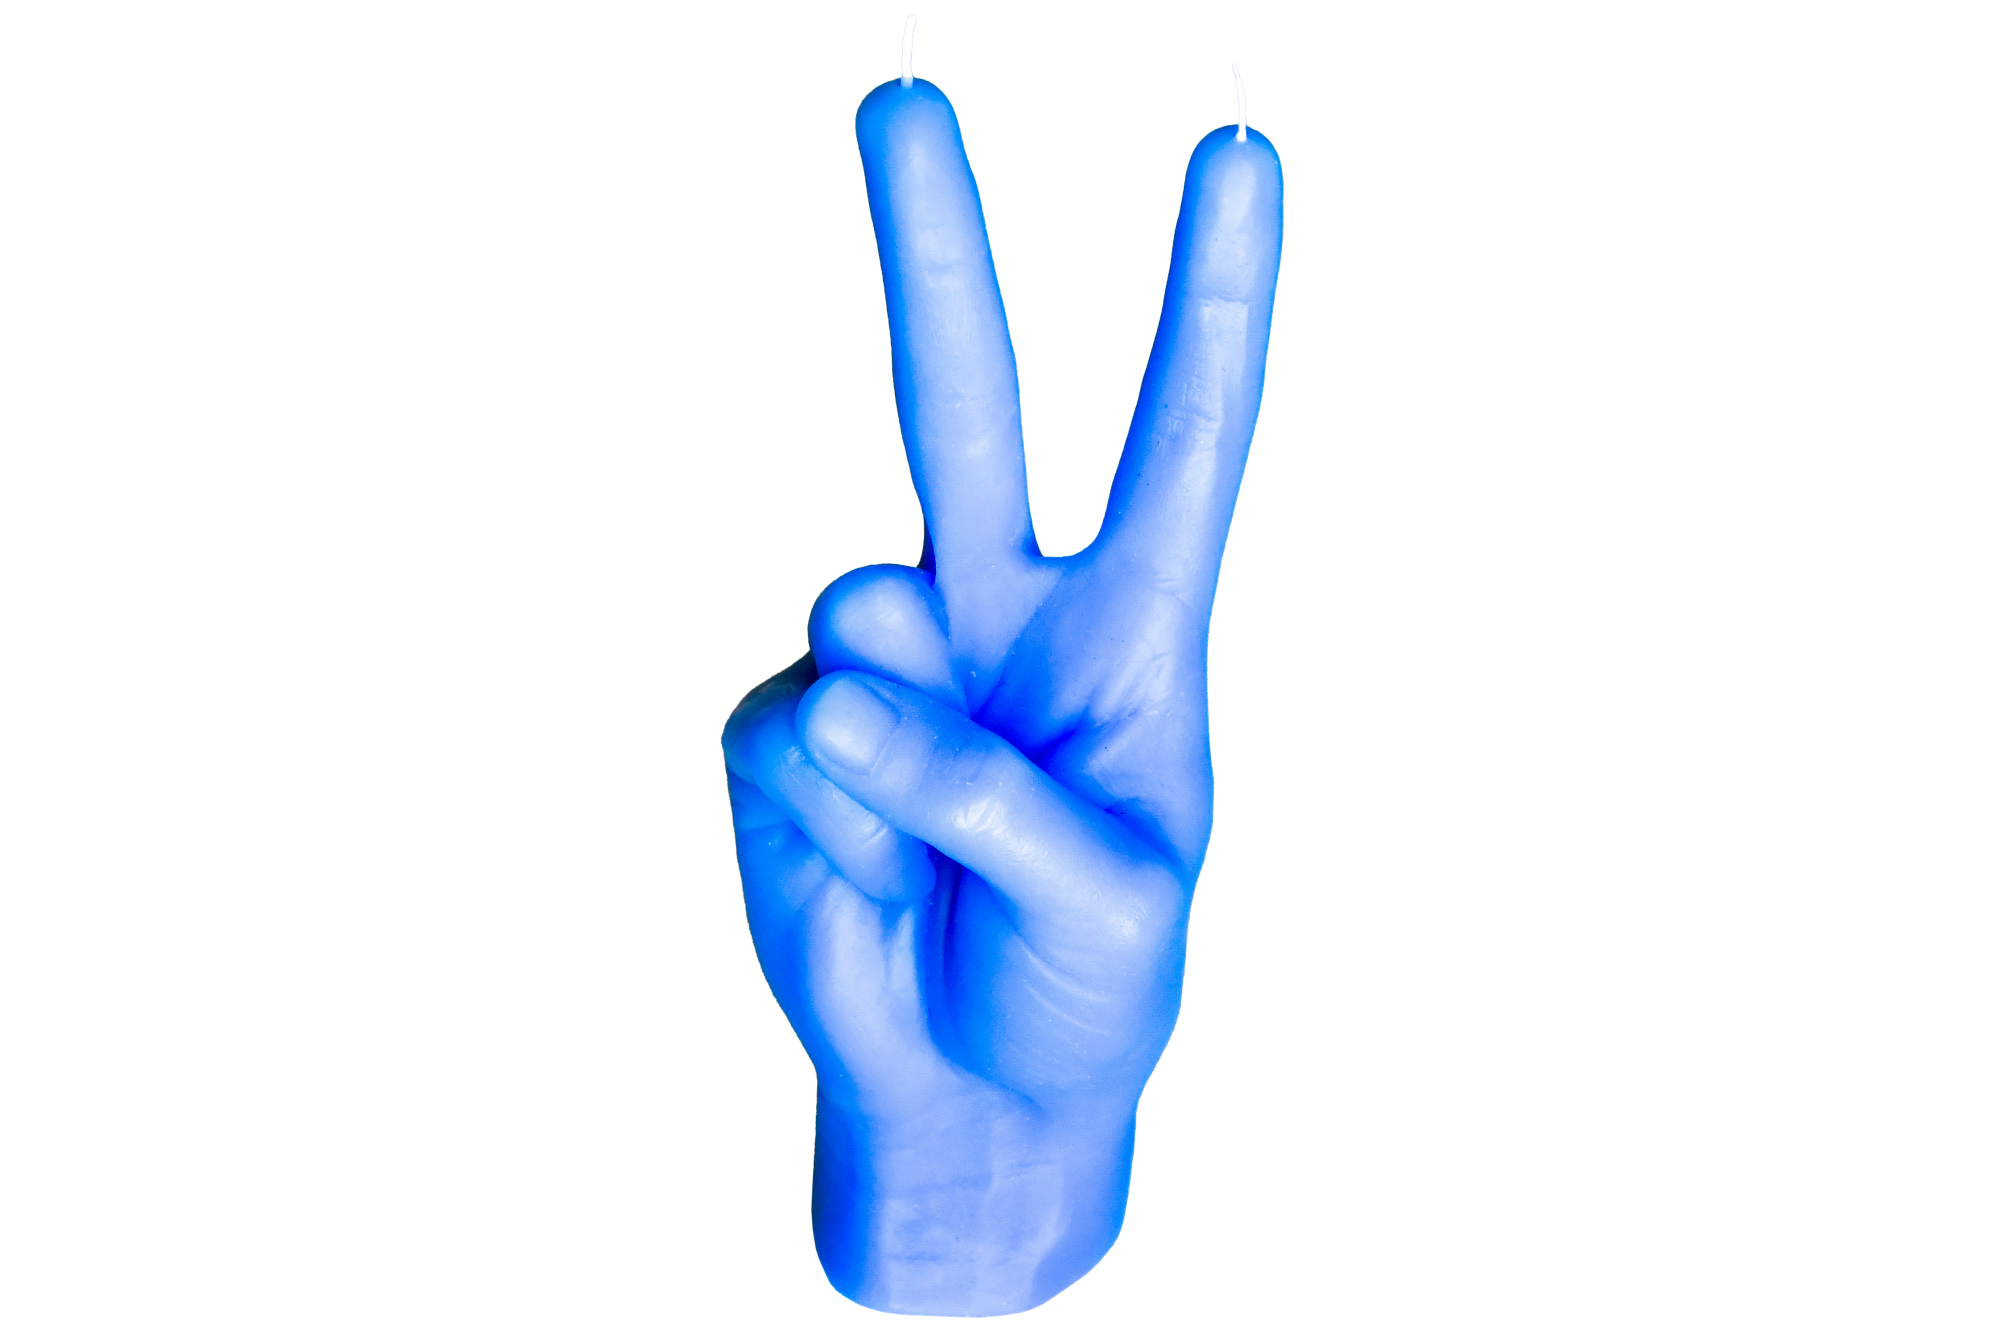 A blue candle in the shape of a hand giving a peace sign